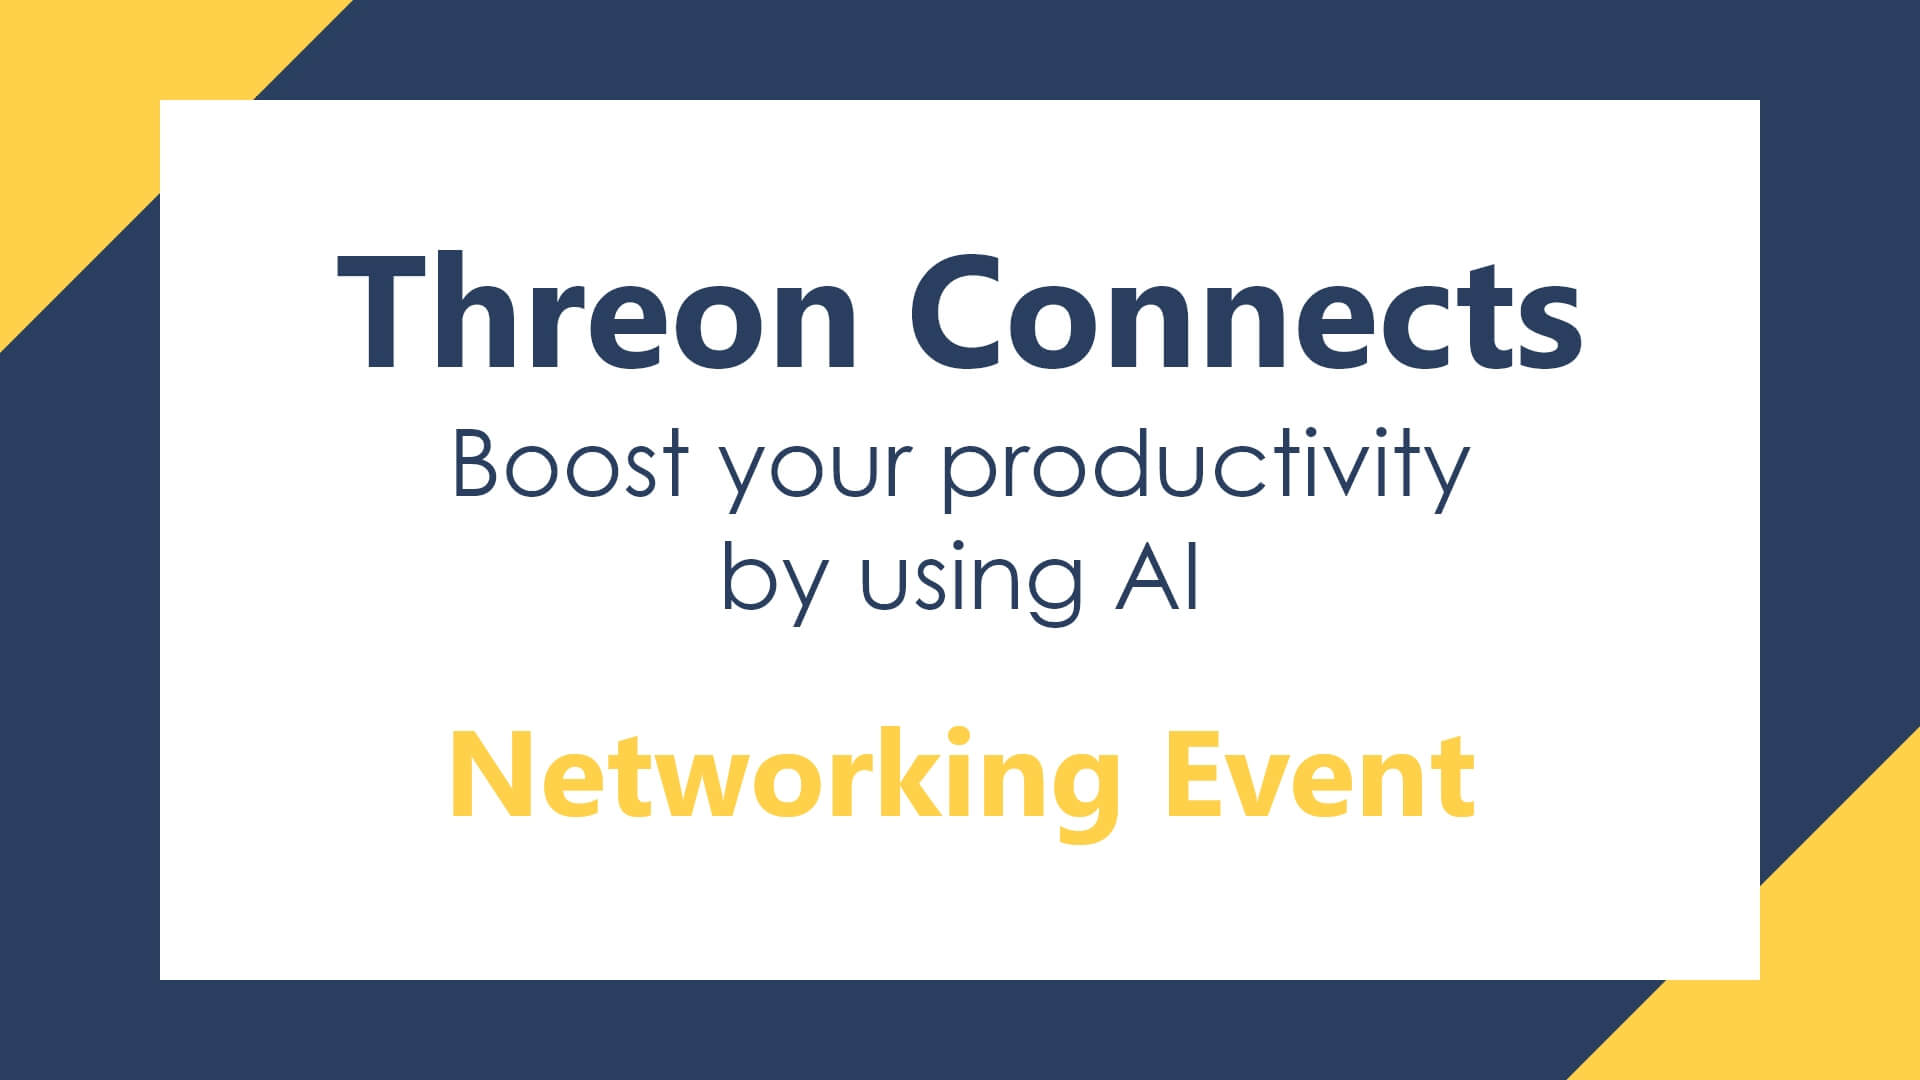 Threon Connects: Networking event